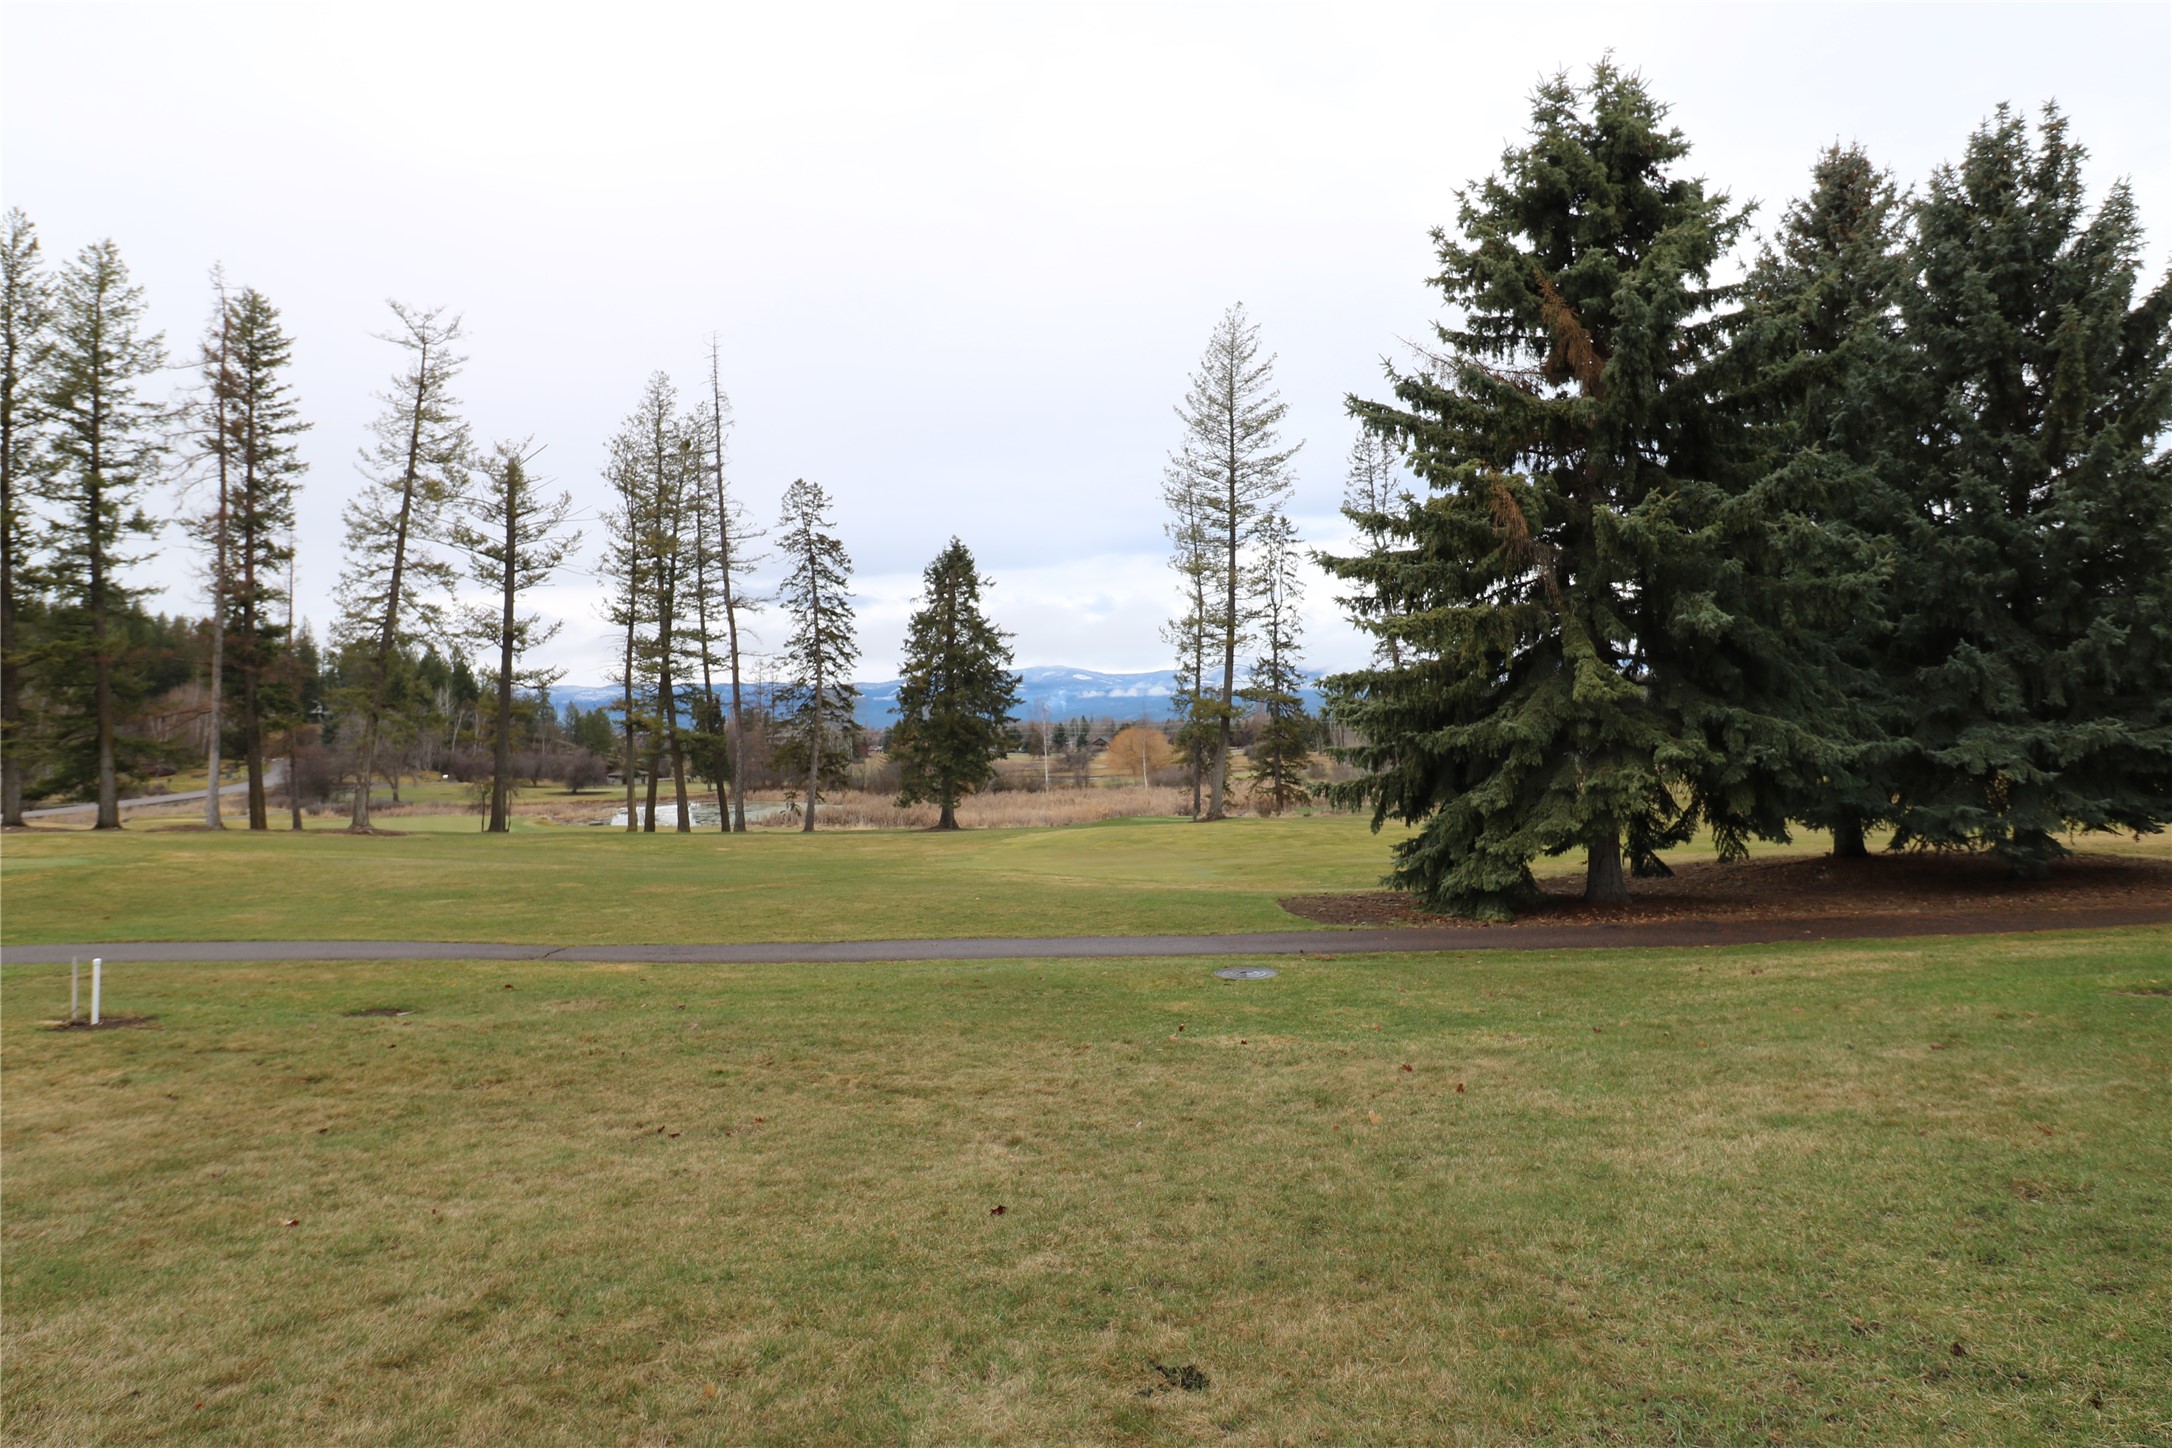 This great Eagle Bend North lot on the 15th tee box awaits your new home. Wonderful views overlooking the golf course, the western mountains, and mature pines.  Good location with nice homes and very convenient to the clubhouse, athletic club, yacht harbor, the village of Bigfork and Flathead Lake. Call Bill Leininger at 406-253-7333 or your real estate professional.